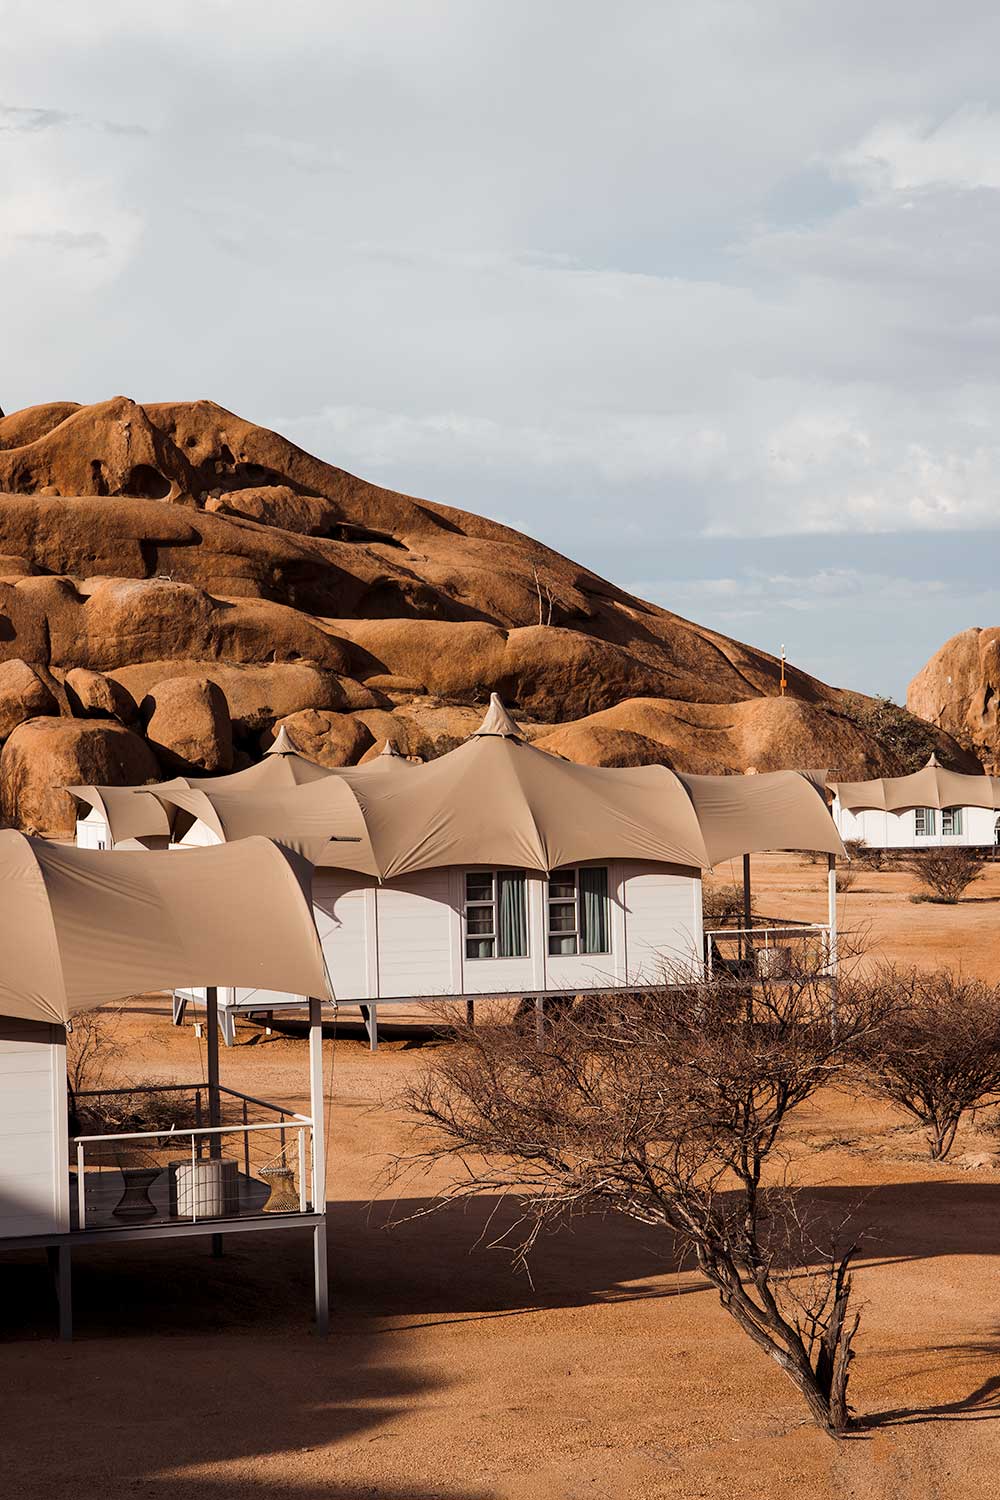 The boho chic clamping accommodations among the boulders of Spitzkoppe Mountain